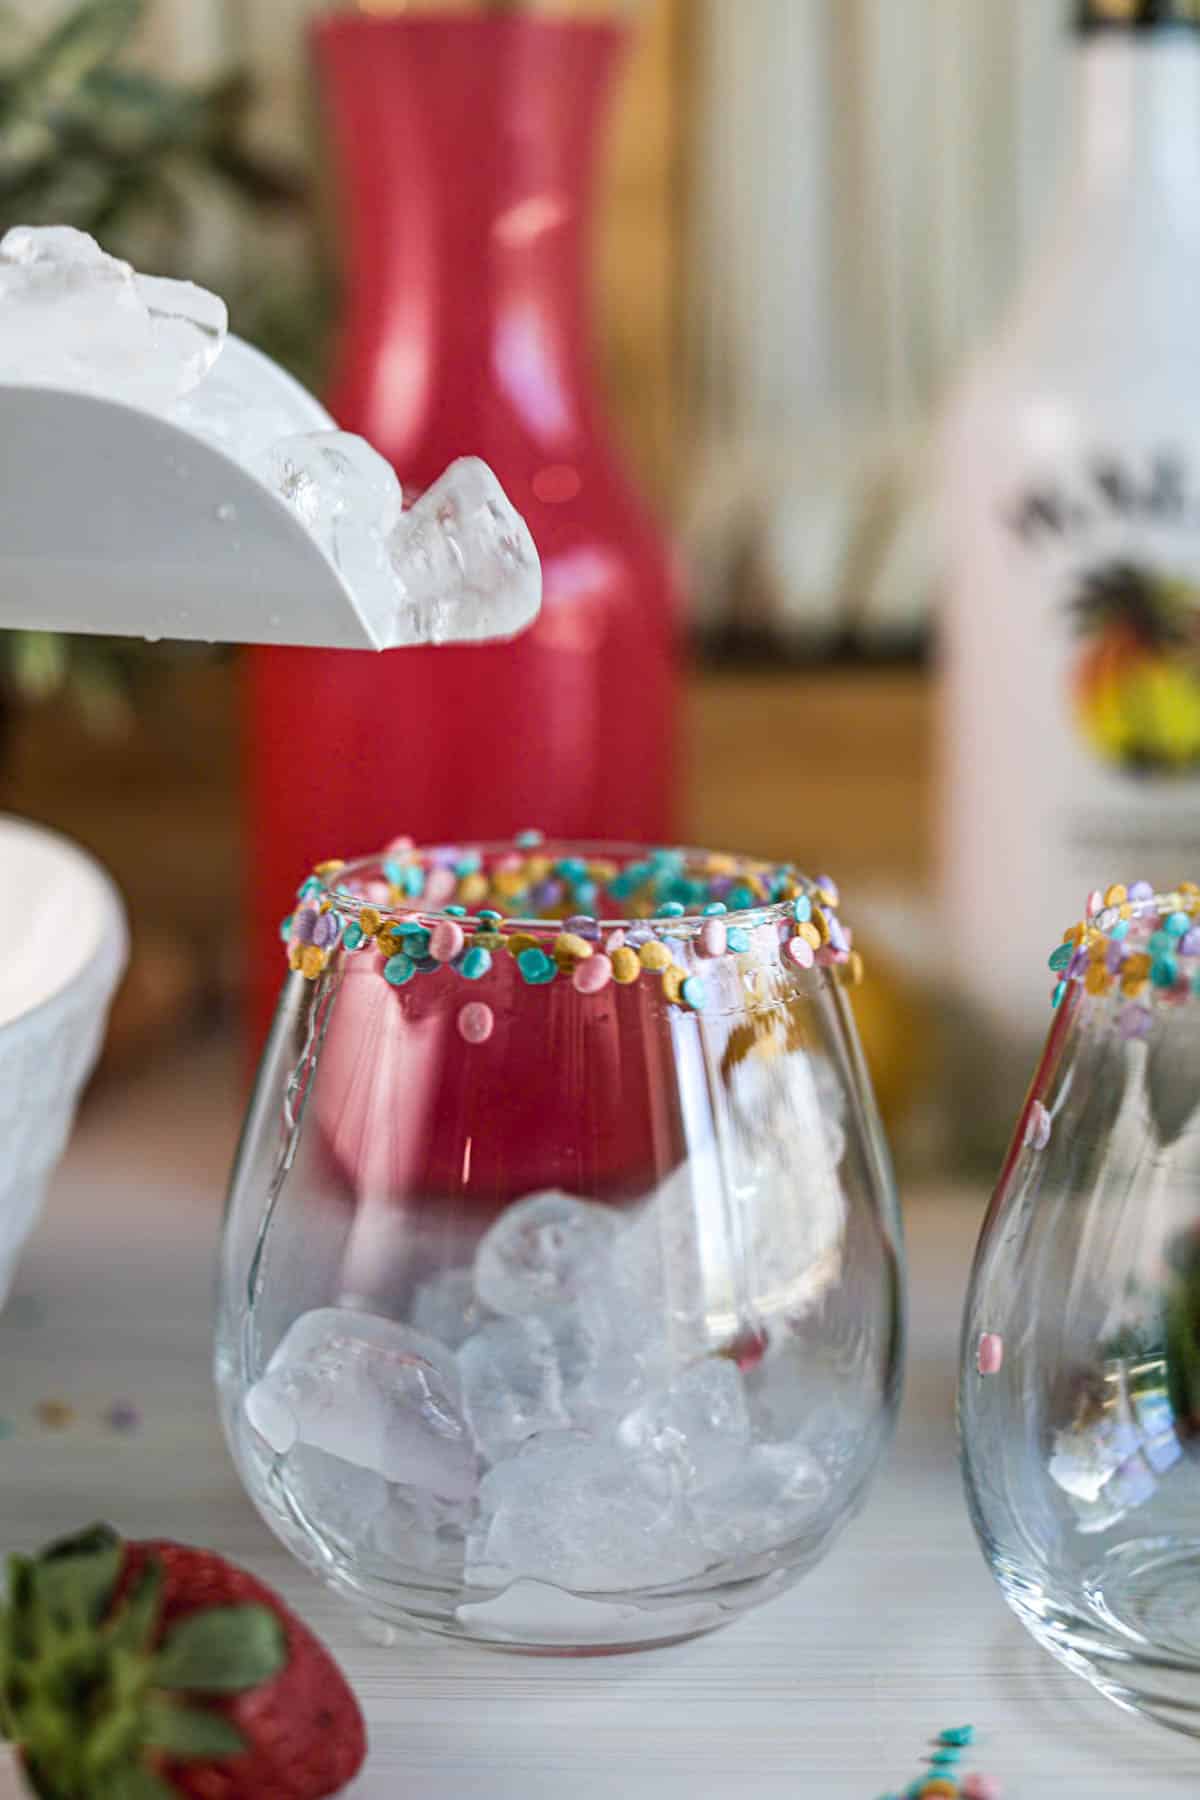 Pouring ice into glasses with sprinkles on rim.